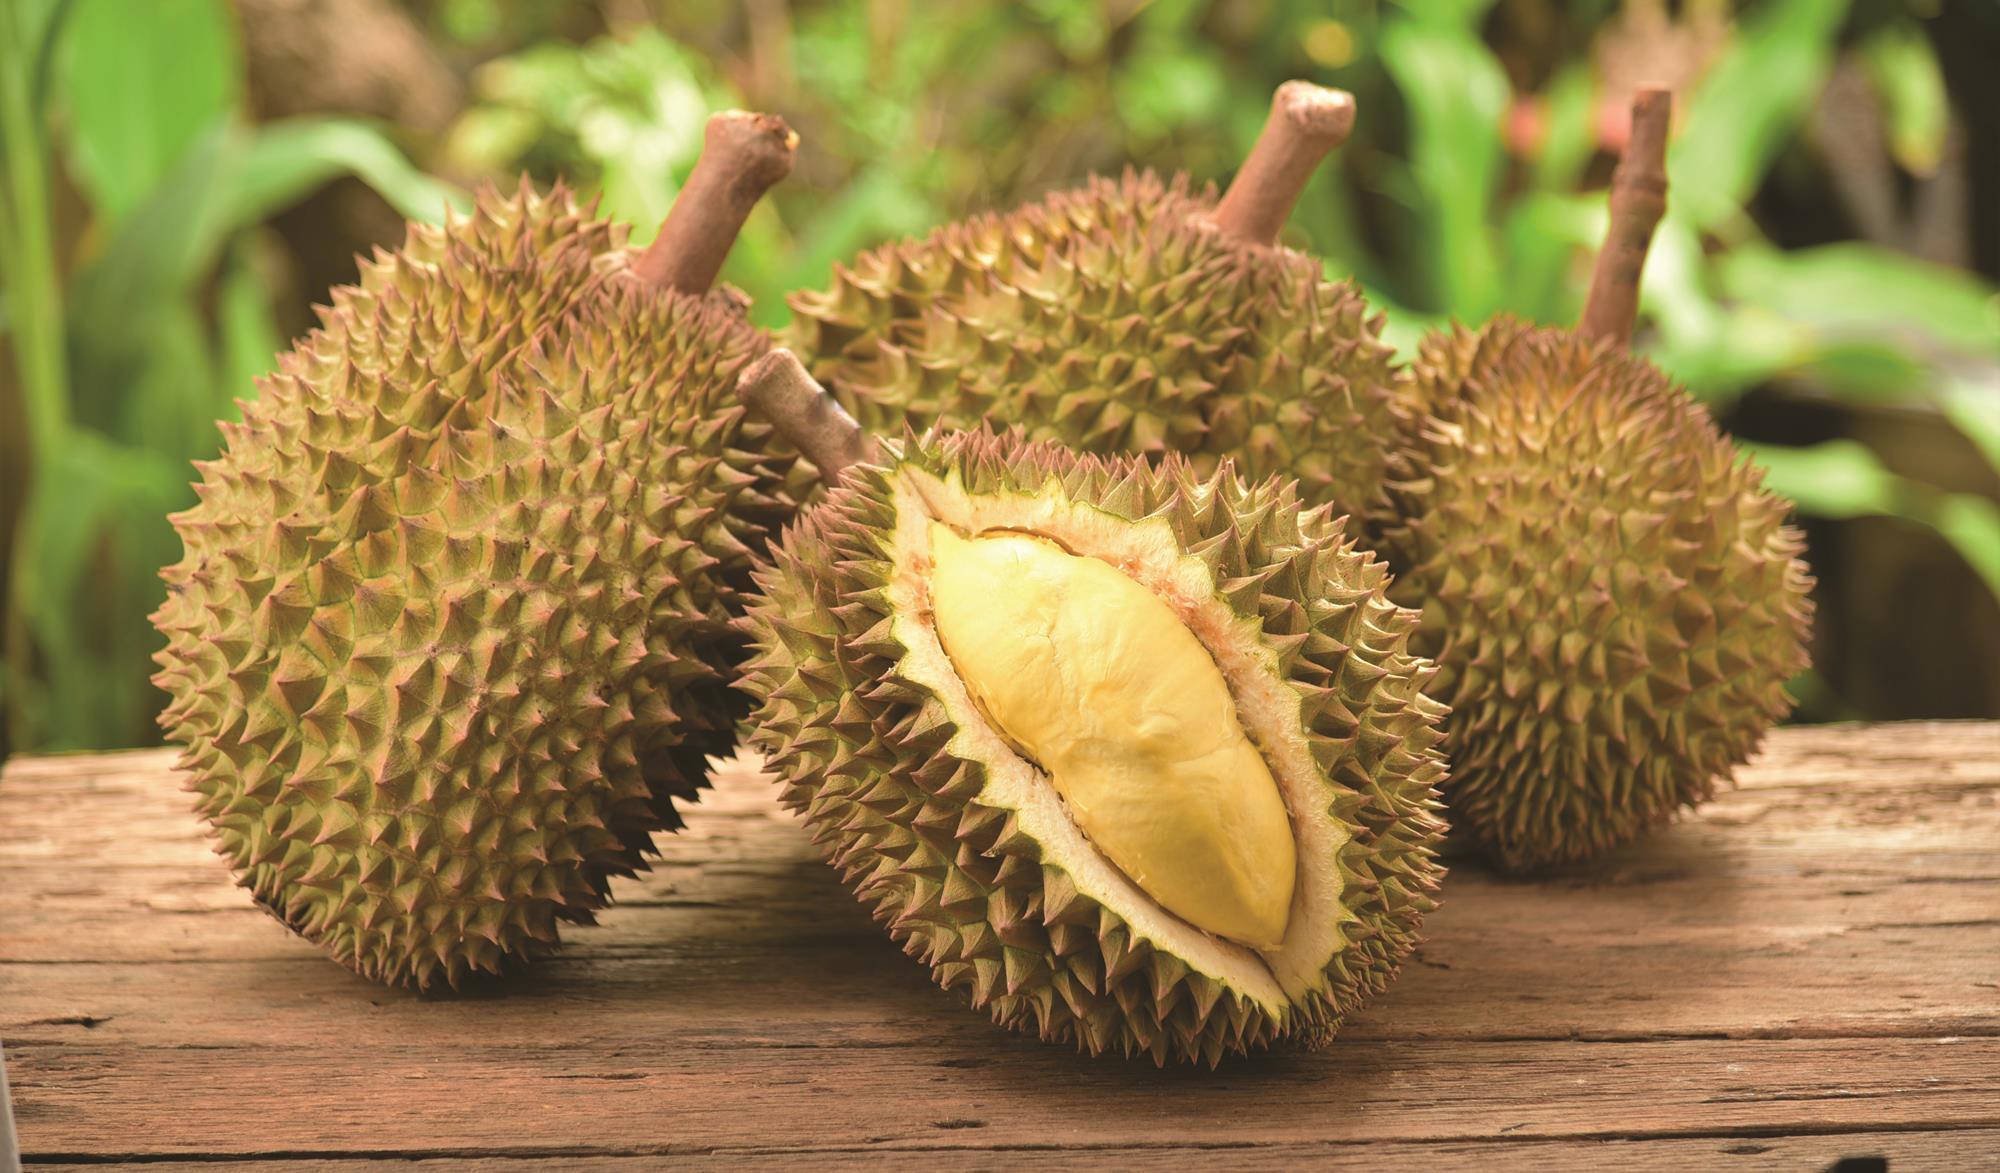 durian delivery in Singapore